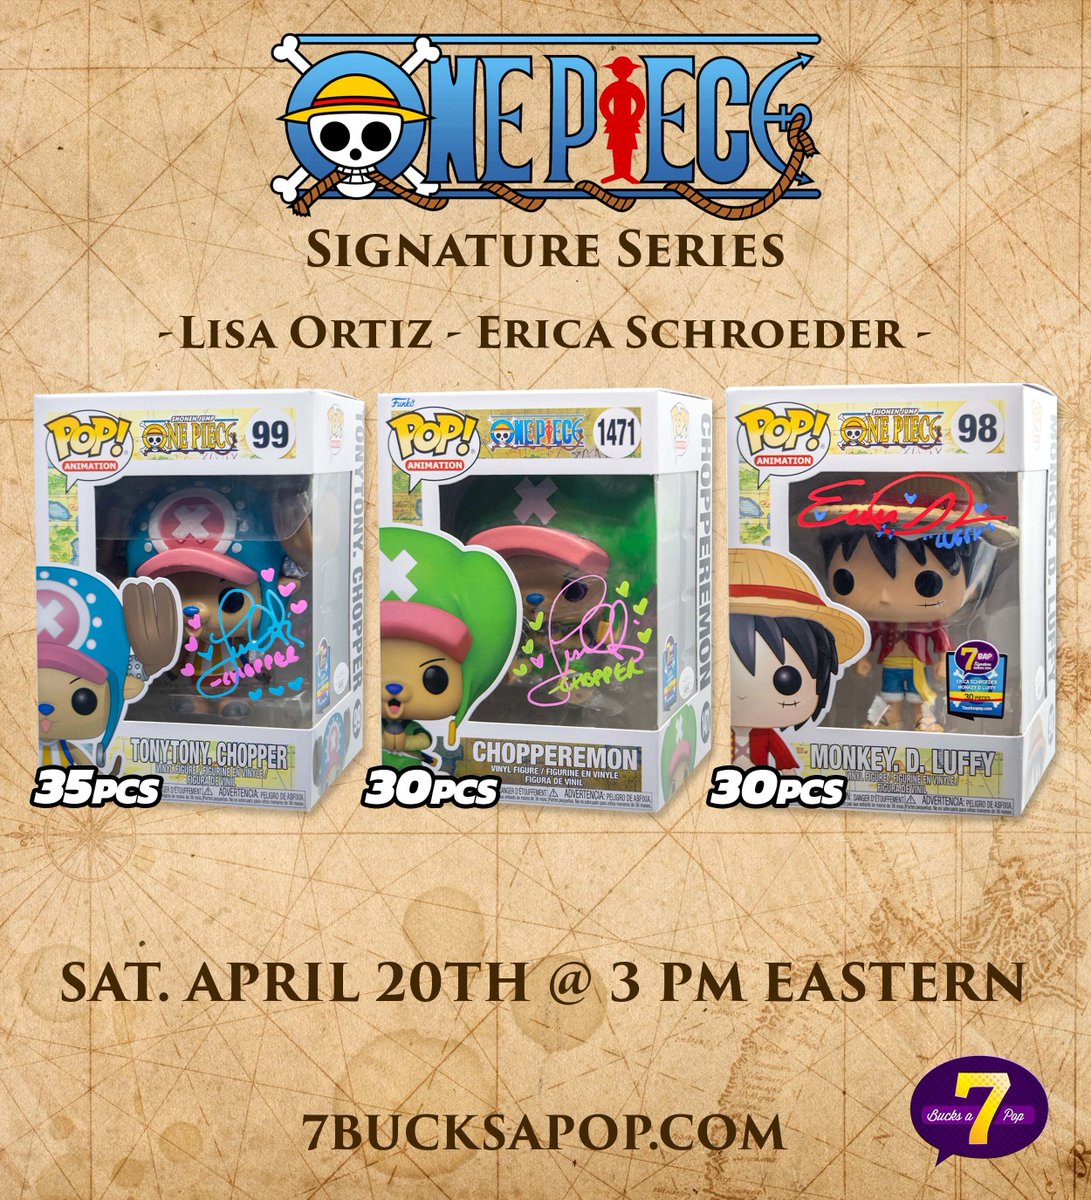 This Saturday April 20th at 3pm Eastern, The #7BAPSignatureSeries proudly presents The One Piece Signature Series! You'll have the unique opportunity to pick up an autographed Funko Pops of Lisa Ortiz & Erica Schroeder! Lisa Ortiz as Tony Tony Chopper (35pcs) or Chopperemon